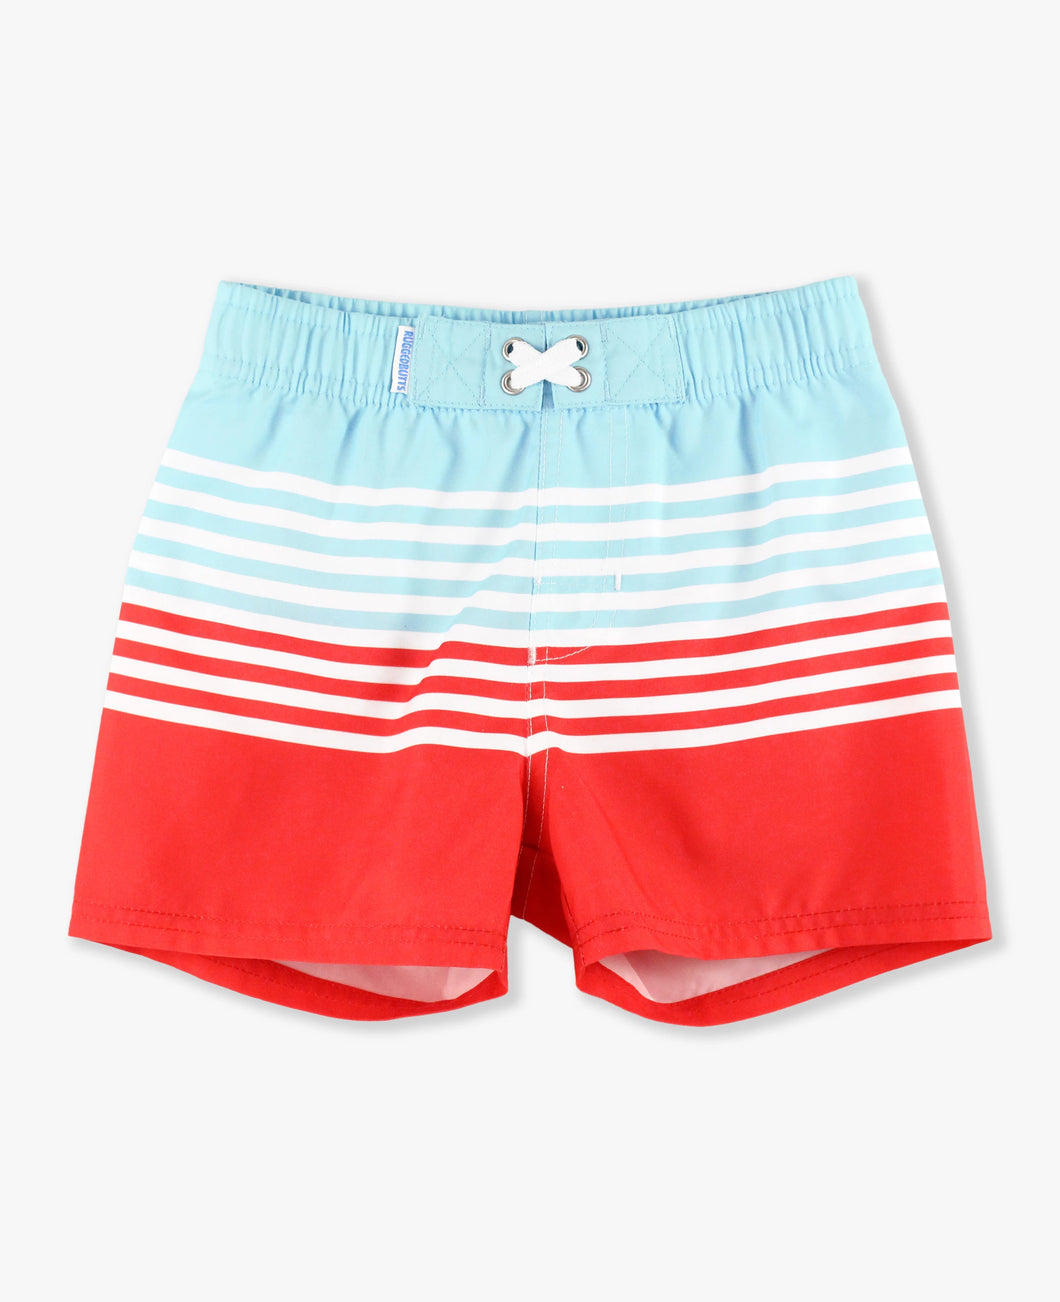 Rugged Butts FROM SEA TO SHINING SEA Swim Trunks